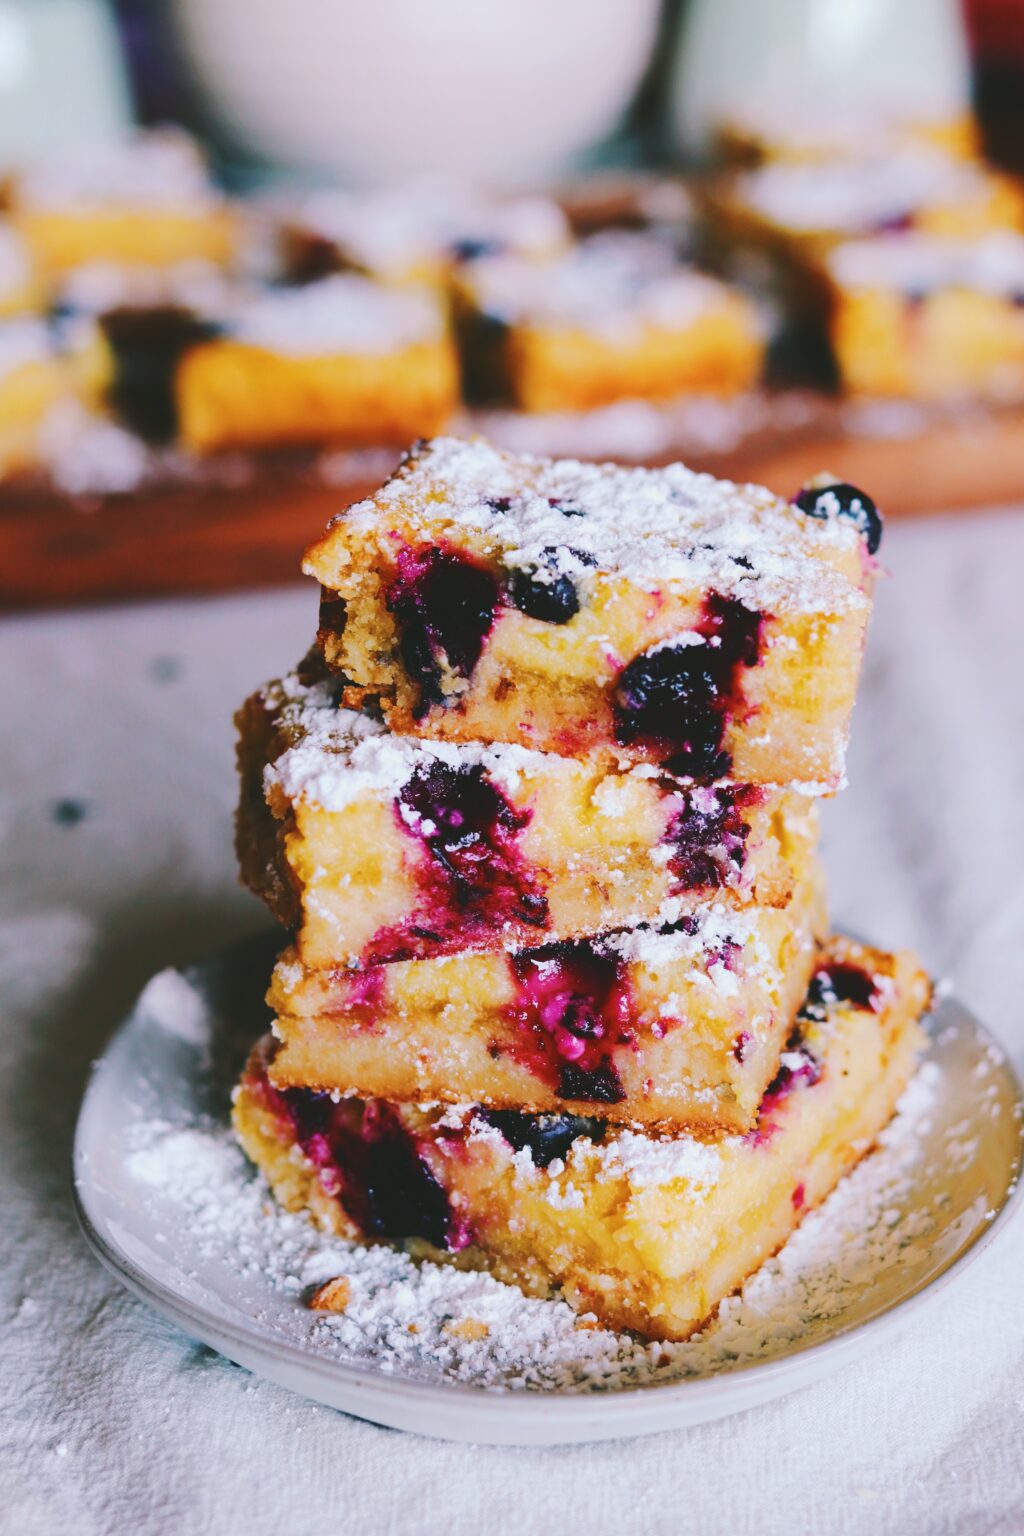 Blueberry Lemon Ricotta Bars with Lavender Crust - Grilled Cheese Social